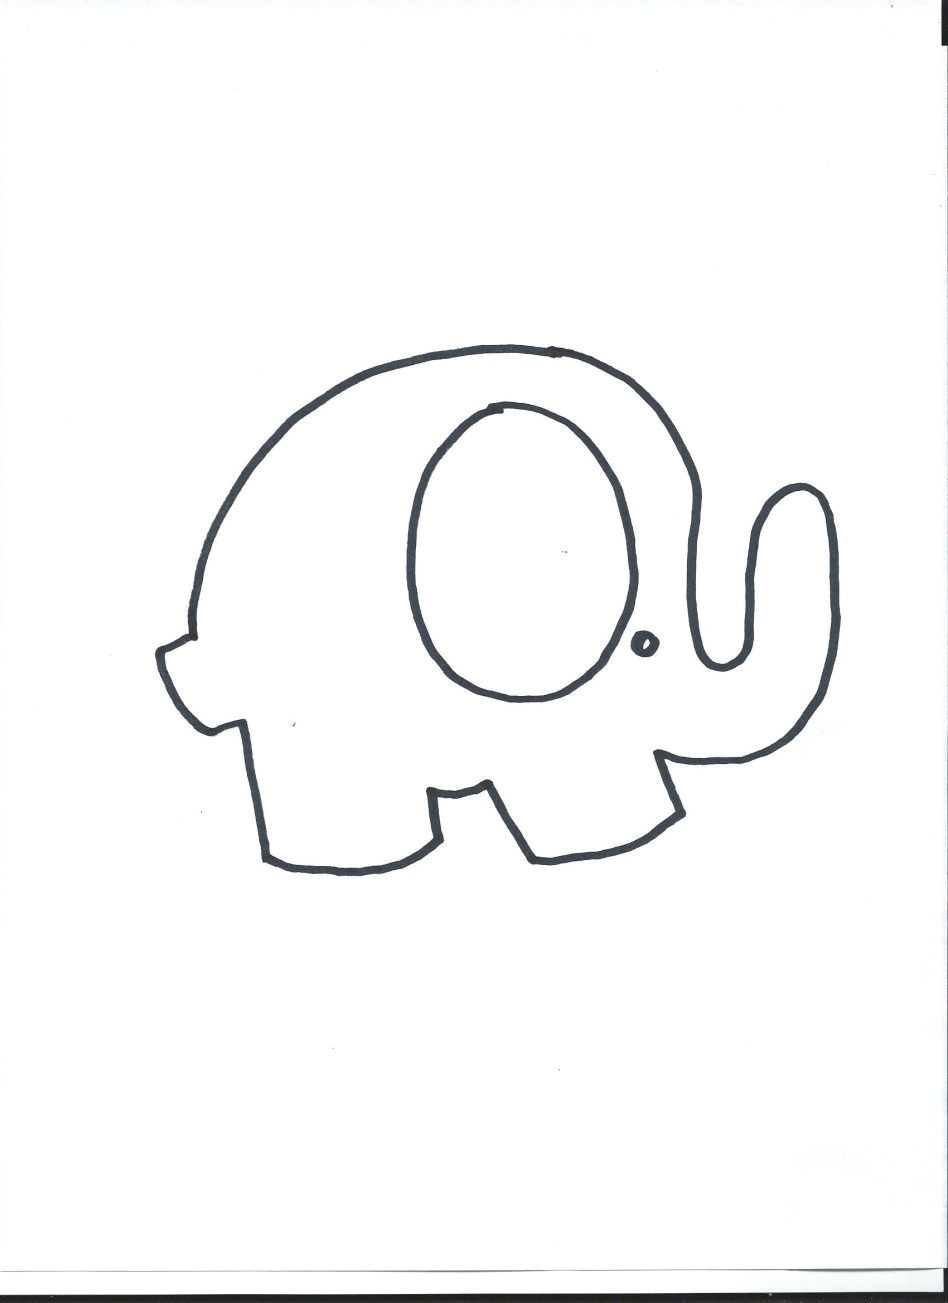 Cartoon Quilt Drawing Cute Elephant Quilt Diy Handmade Gifts are Best Patterns Quilts